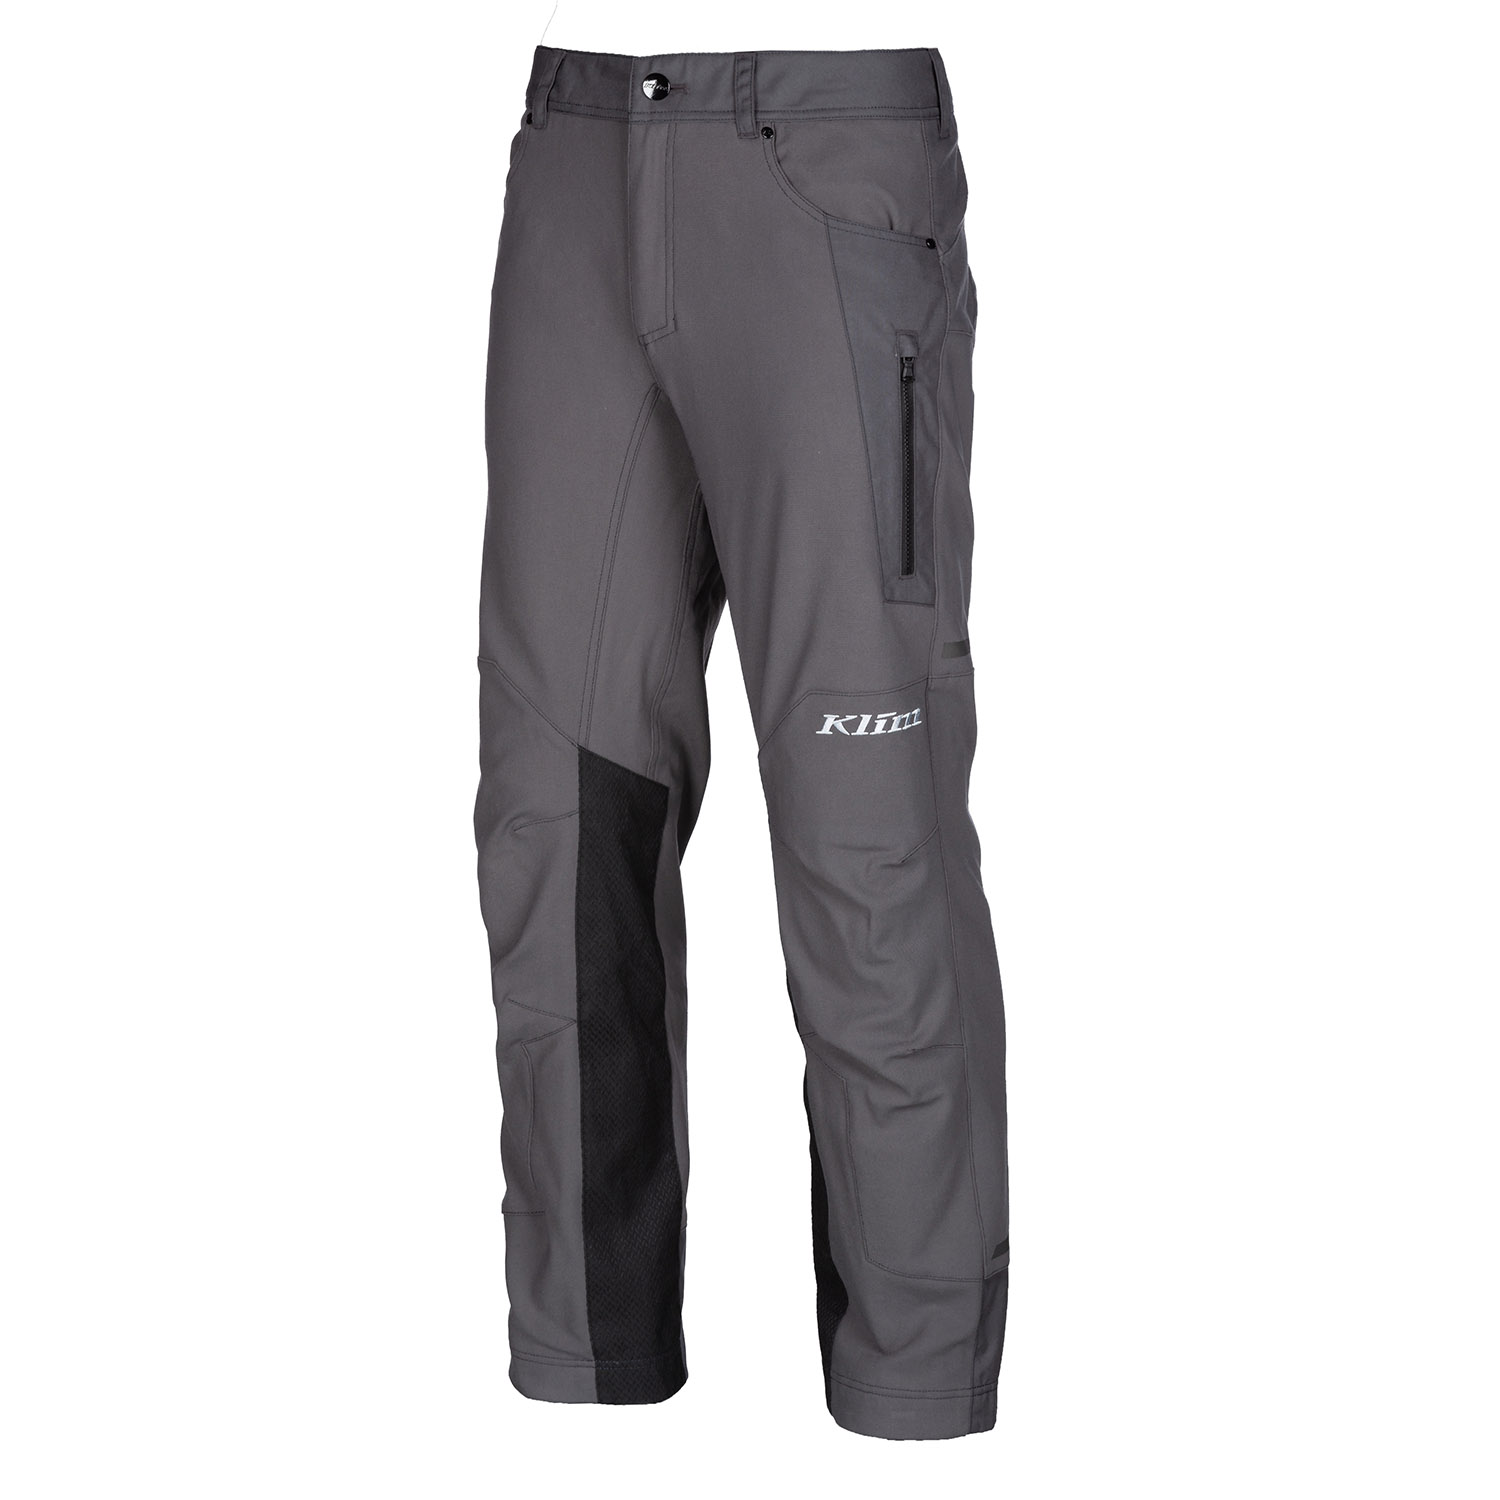 Pant suggestions | GL1800Riders Forums